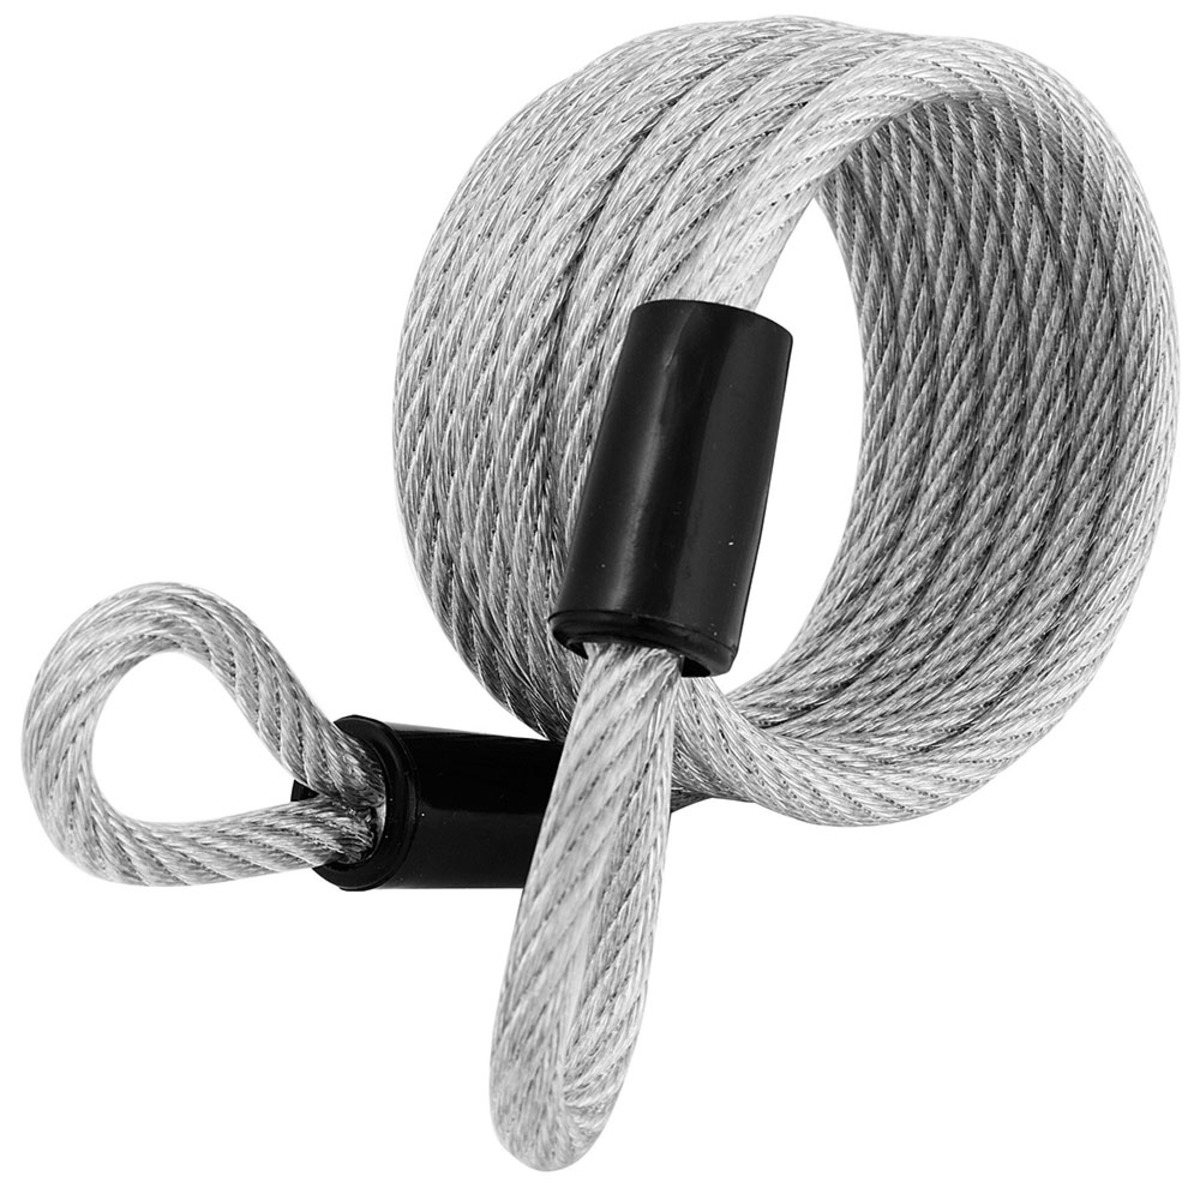 Master Lock® Gray Braided Steel Looped End Cable Lock